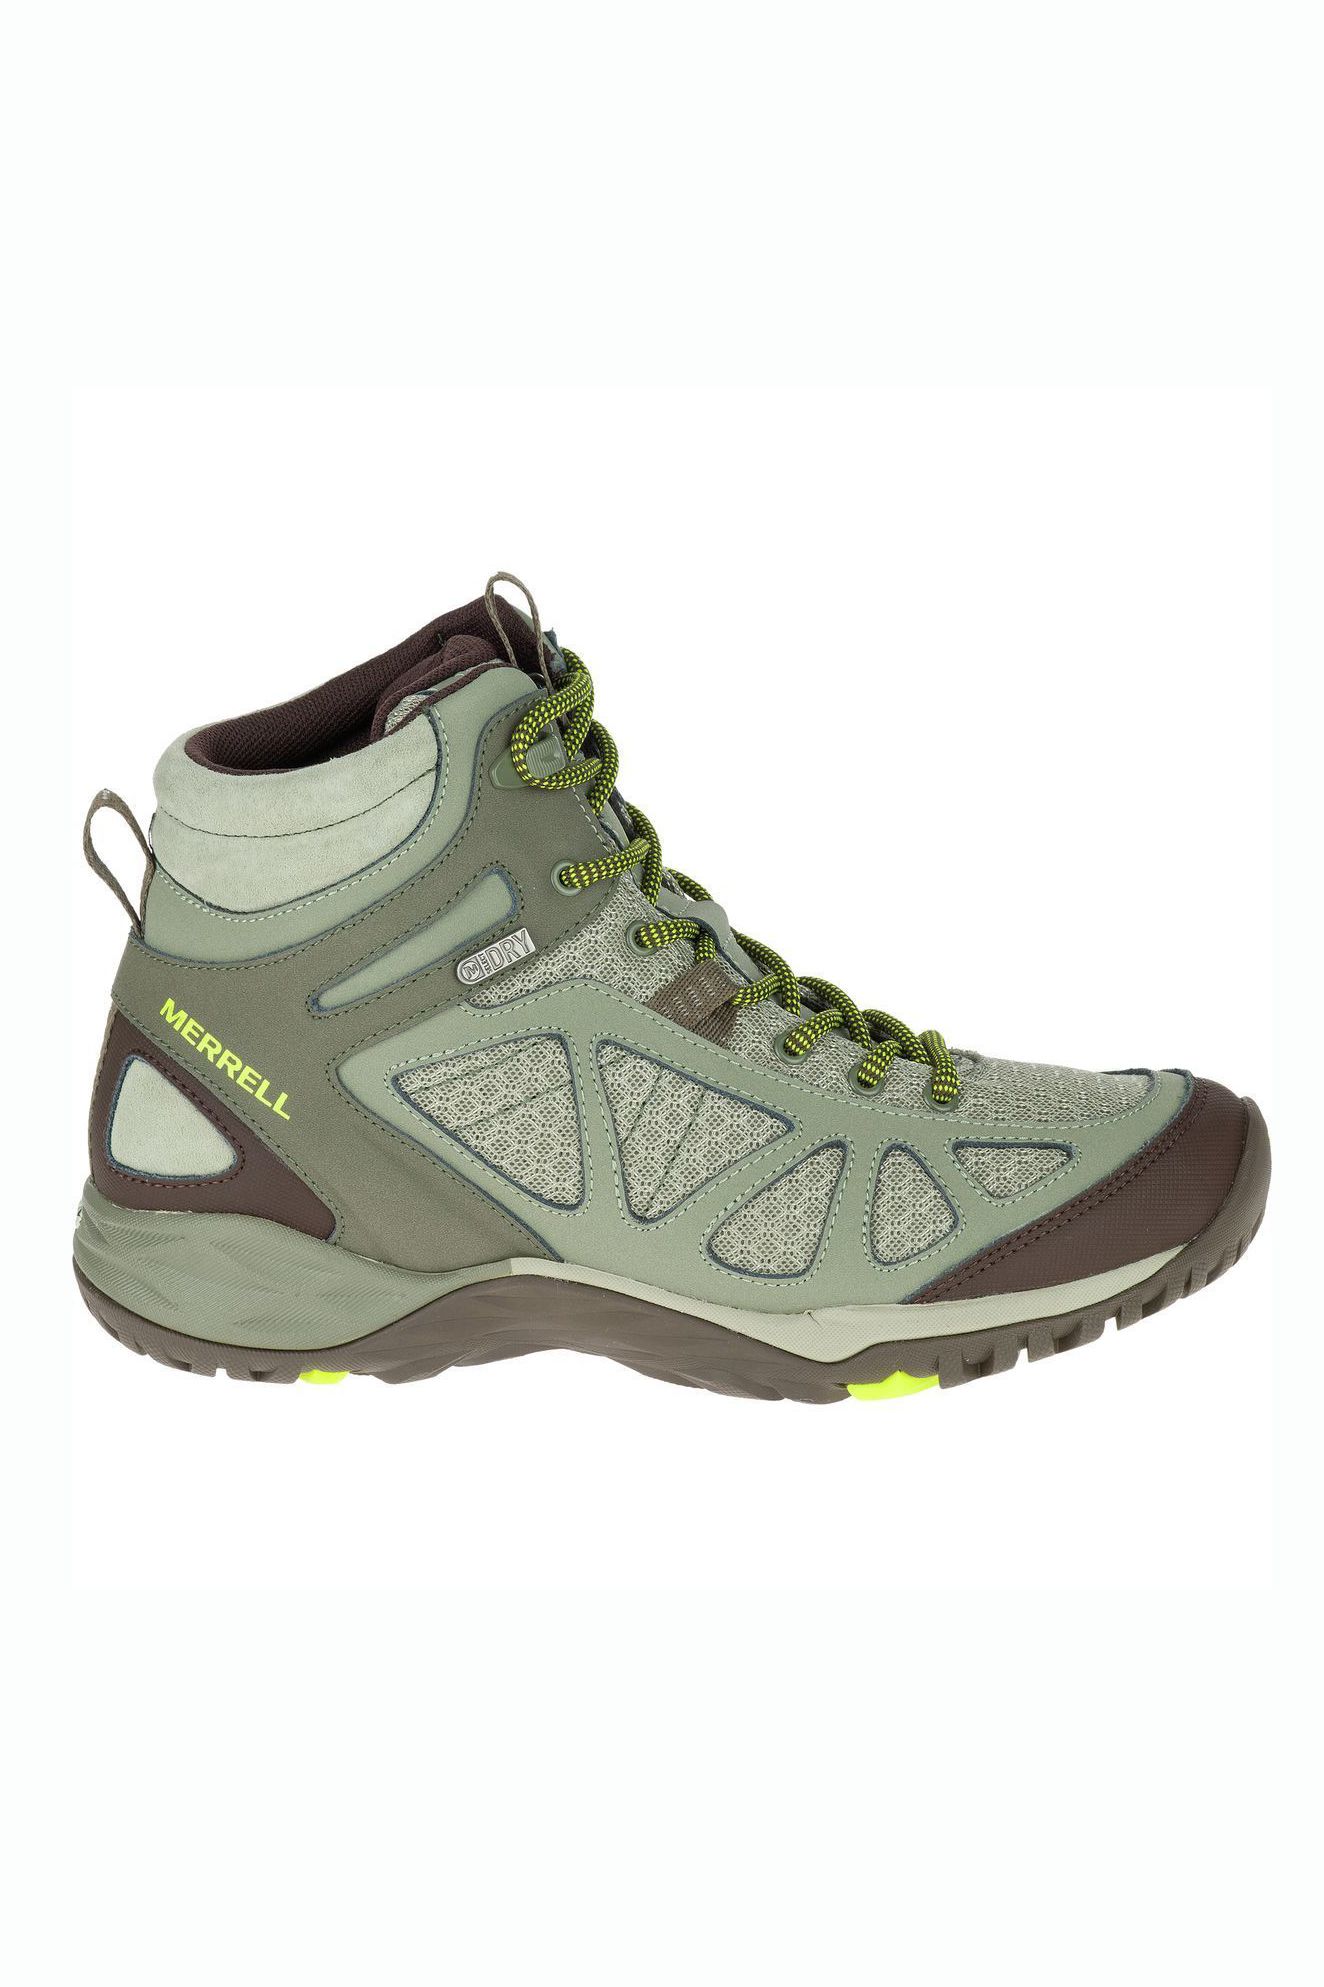 best women's hiking shoes for beginners